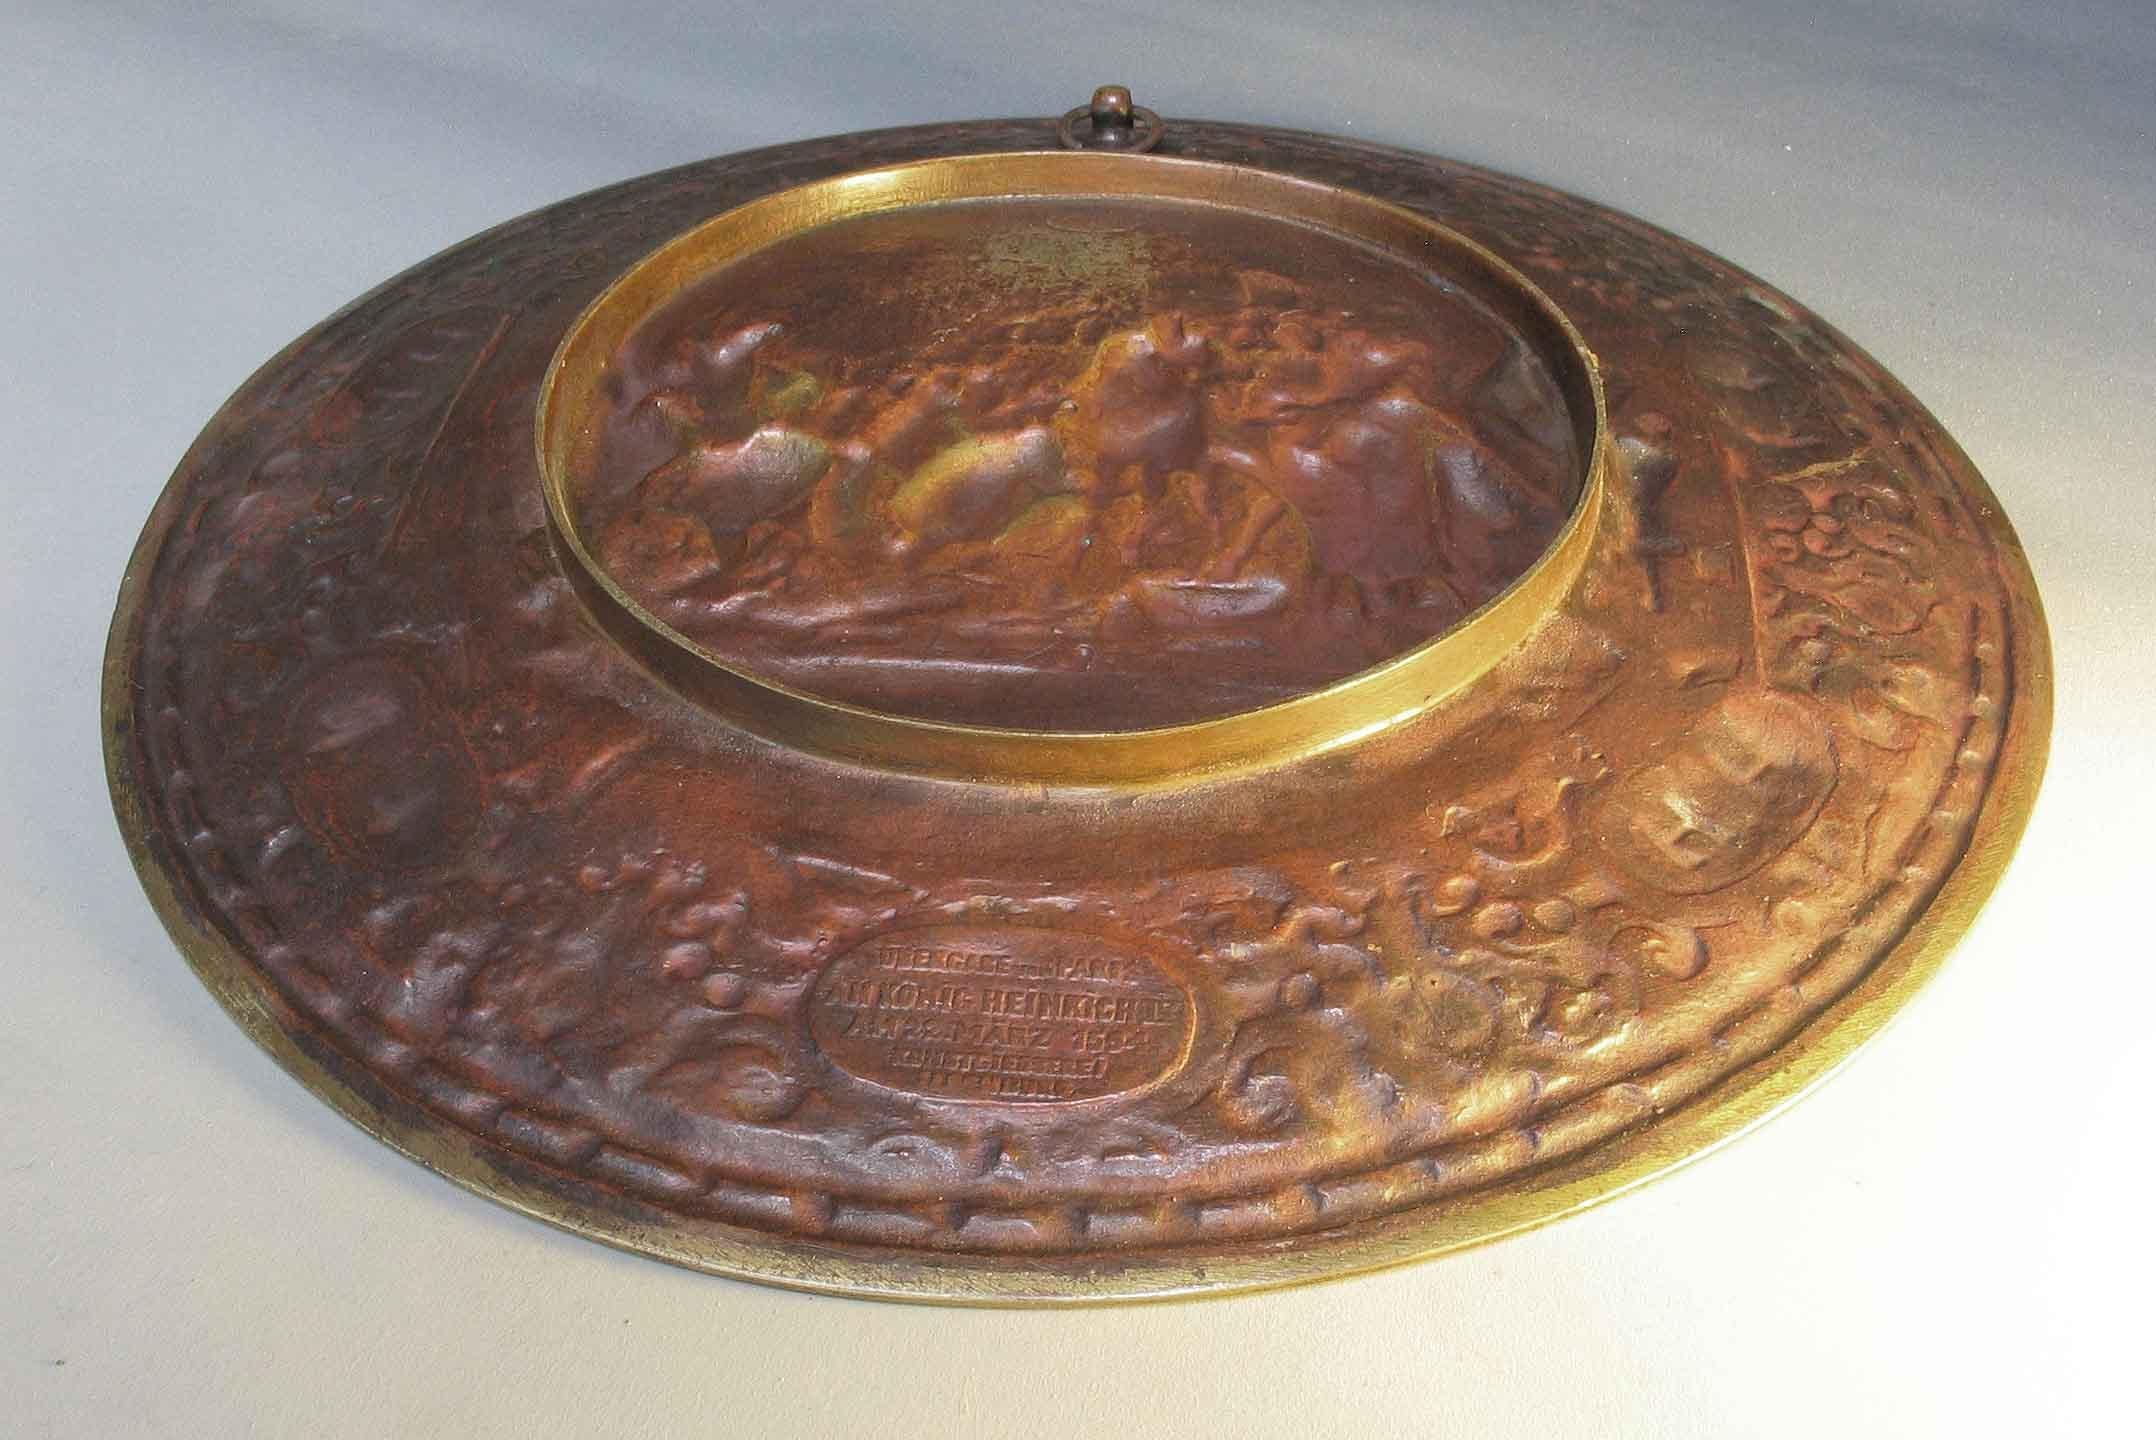 German Bronze Historicism Charger Depicting Entry of Henry IV into Paris in 1594 In Good Condition For Sale In Ottawa, Ontario